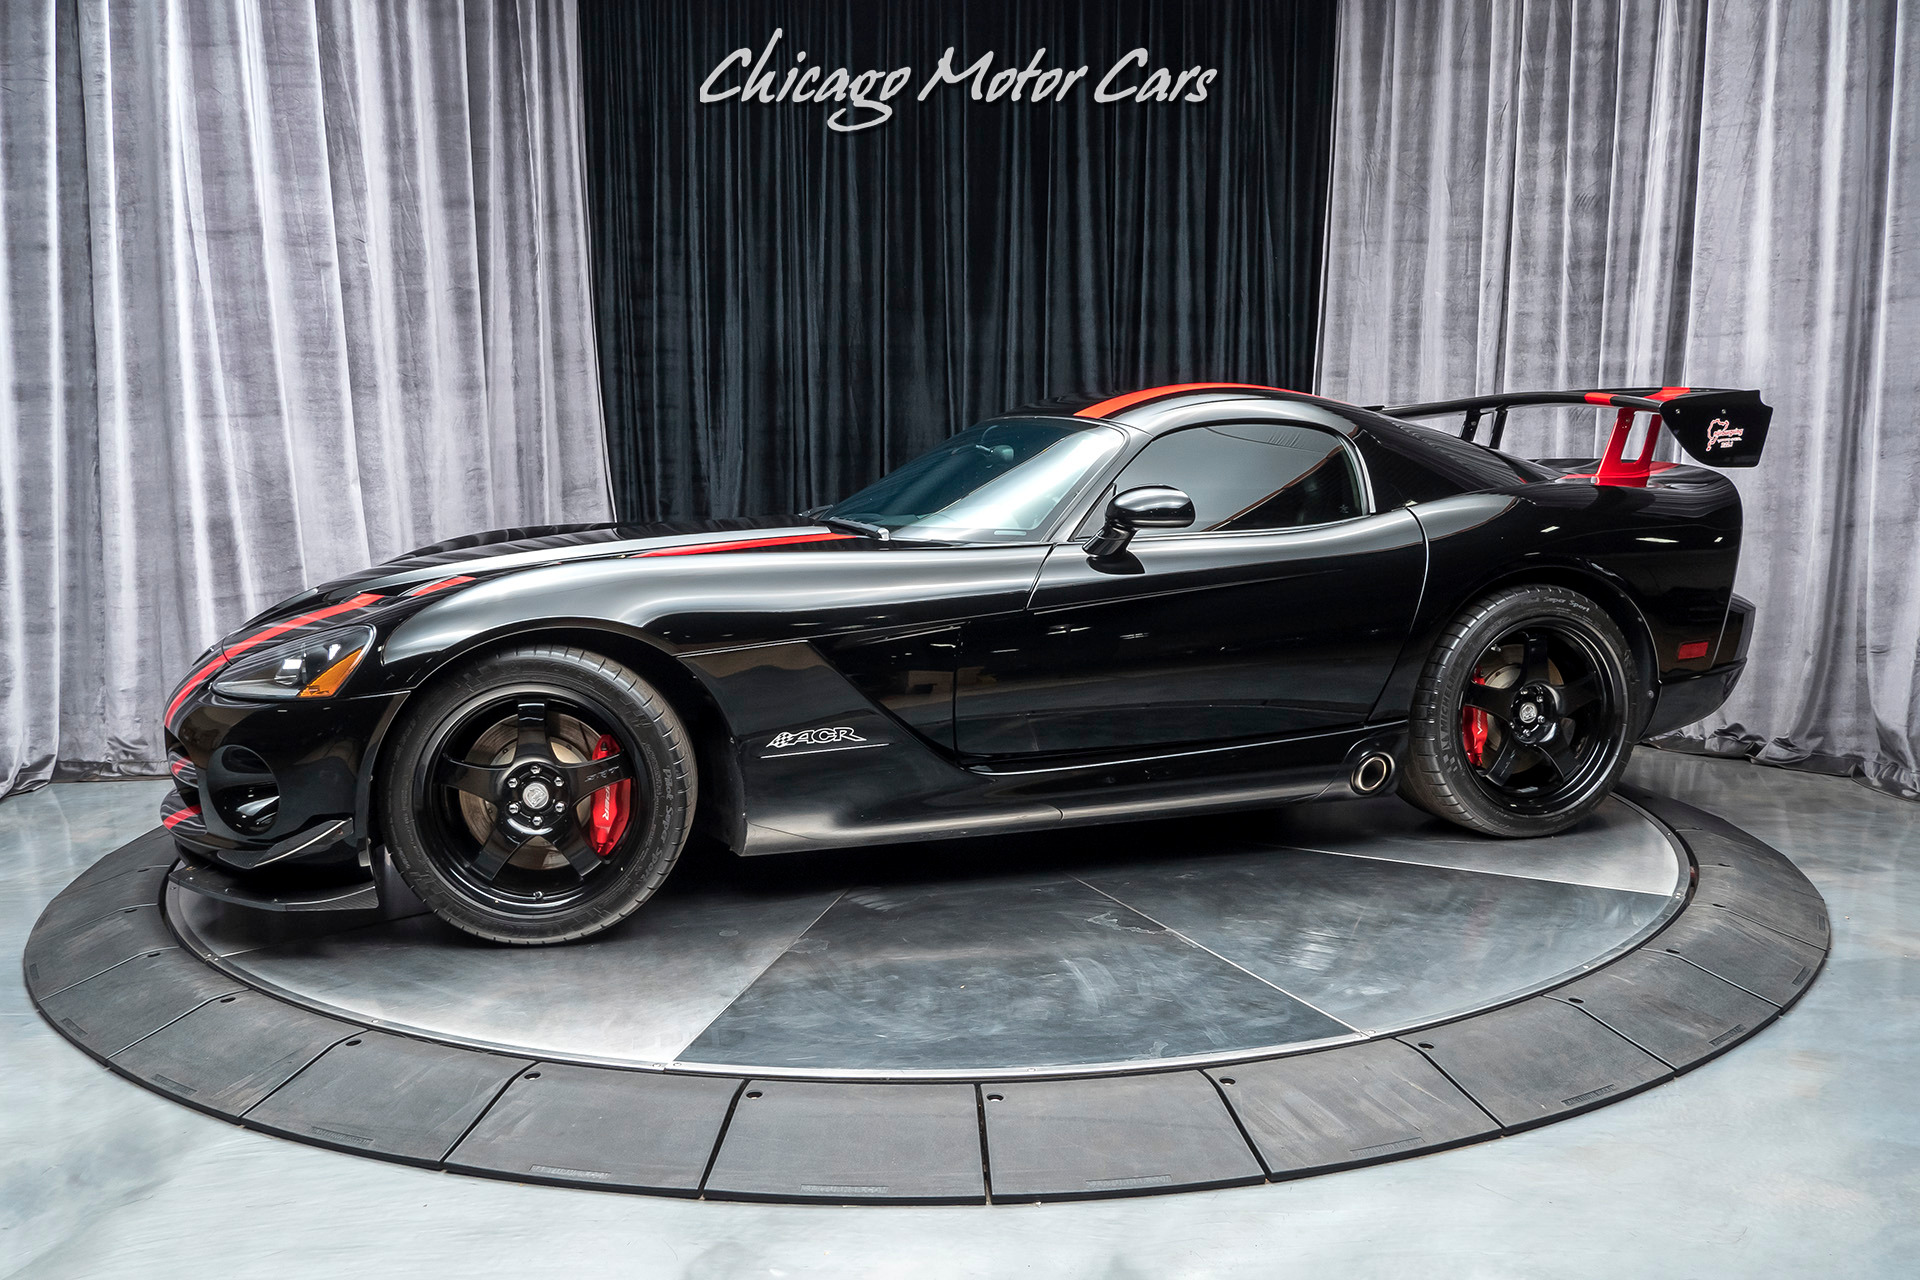 Used-2009-Dodge-Viper-SRT-10-ACR-Coupe-MSRP-107K-ACR-TRACK-PACKAGE